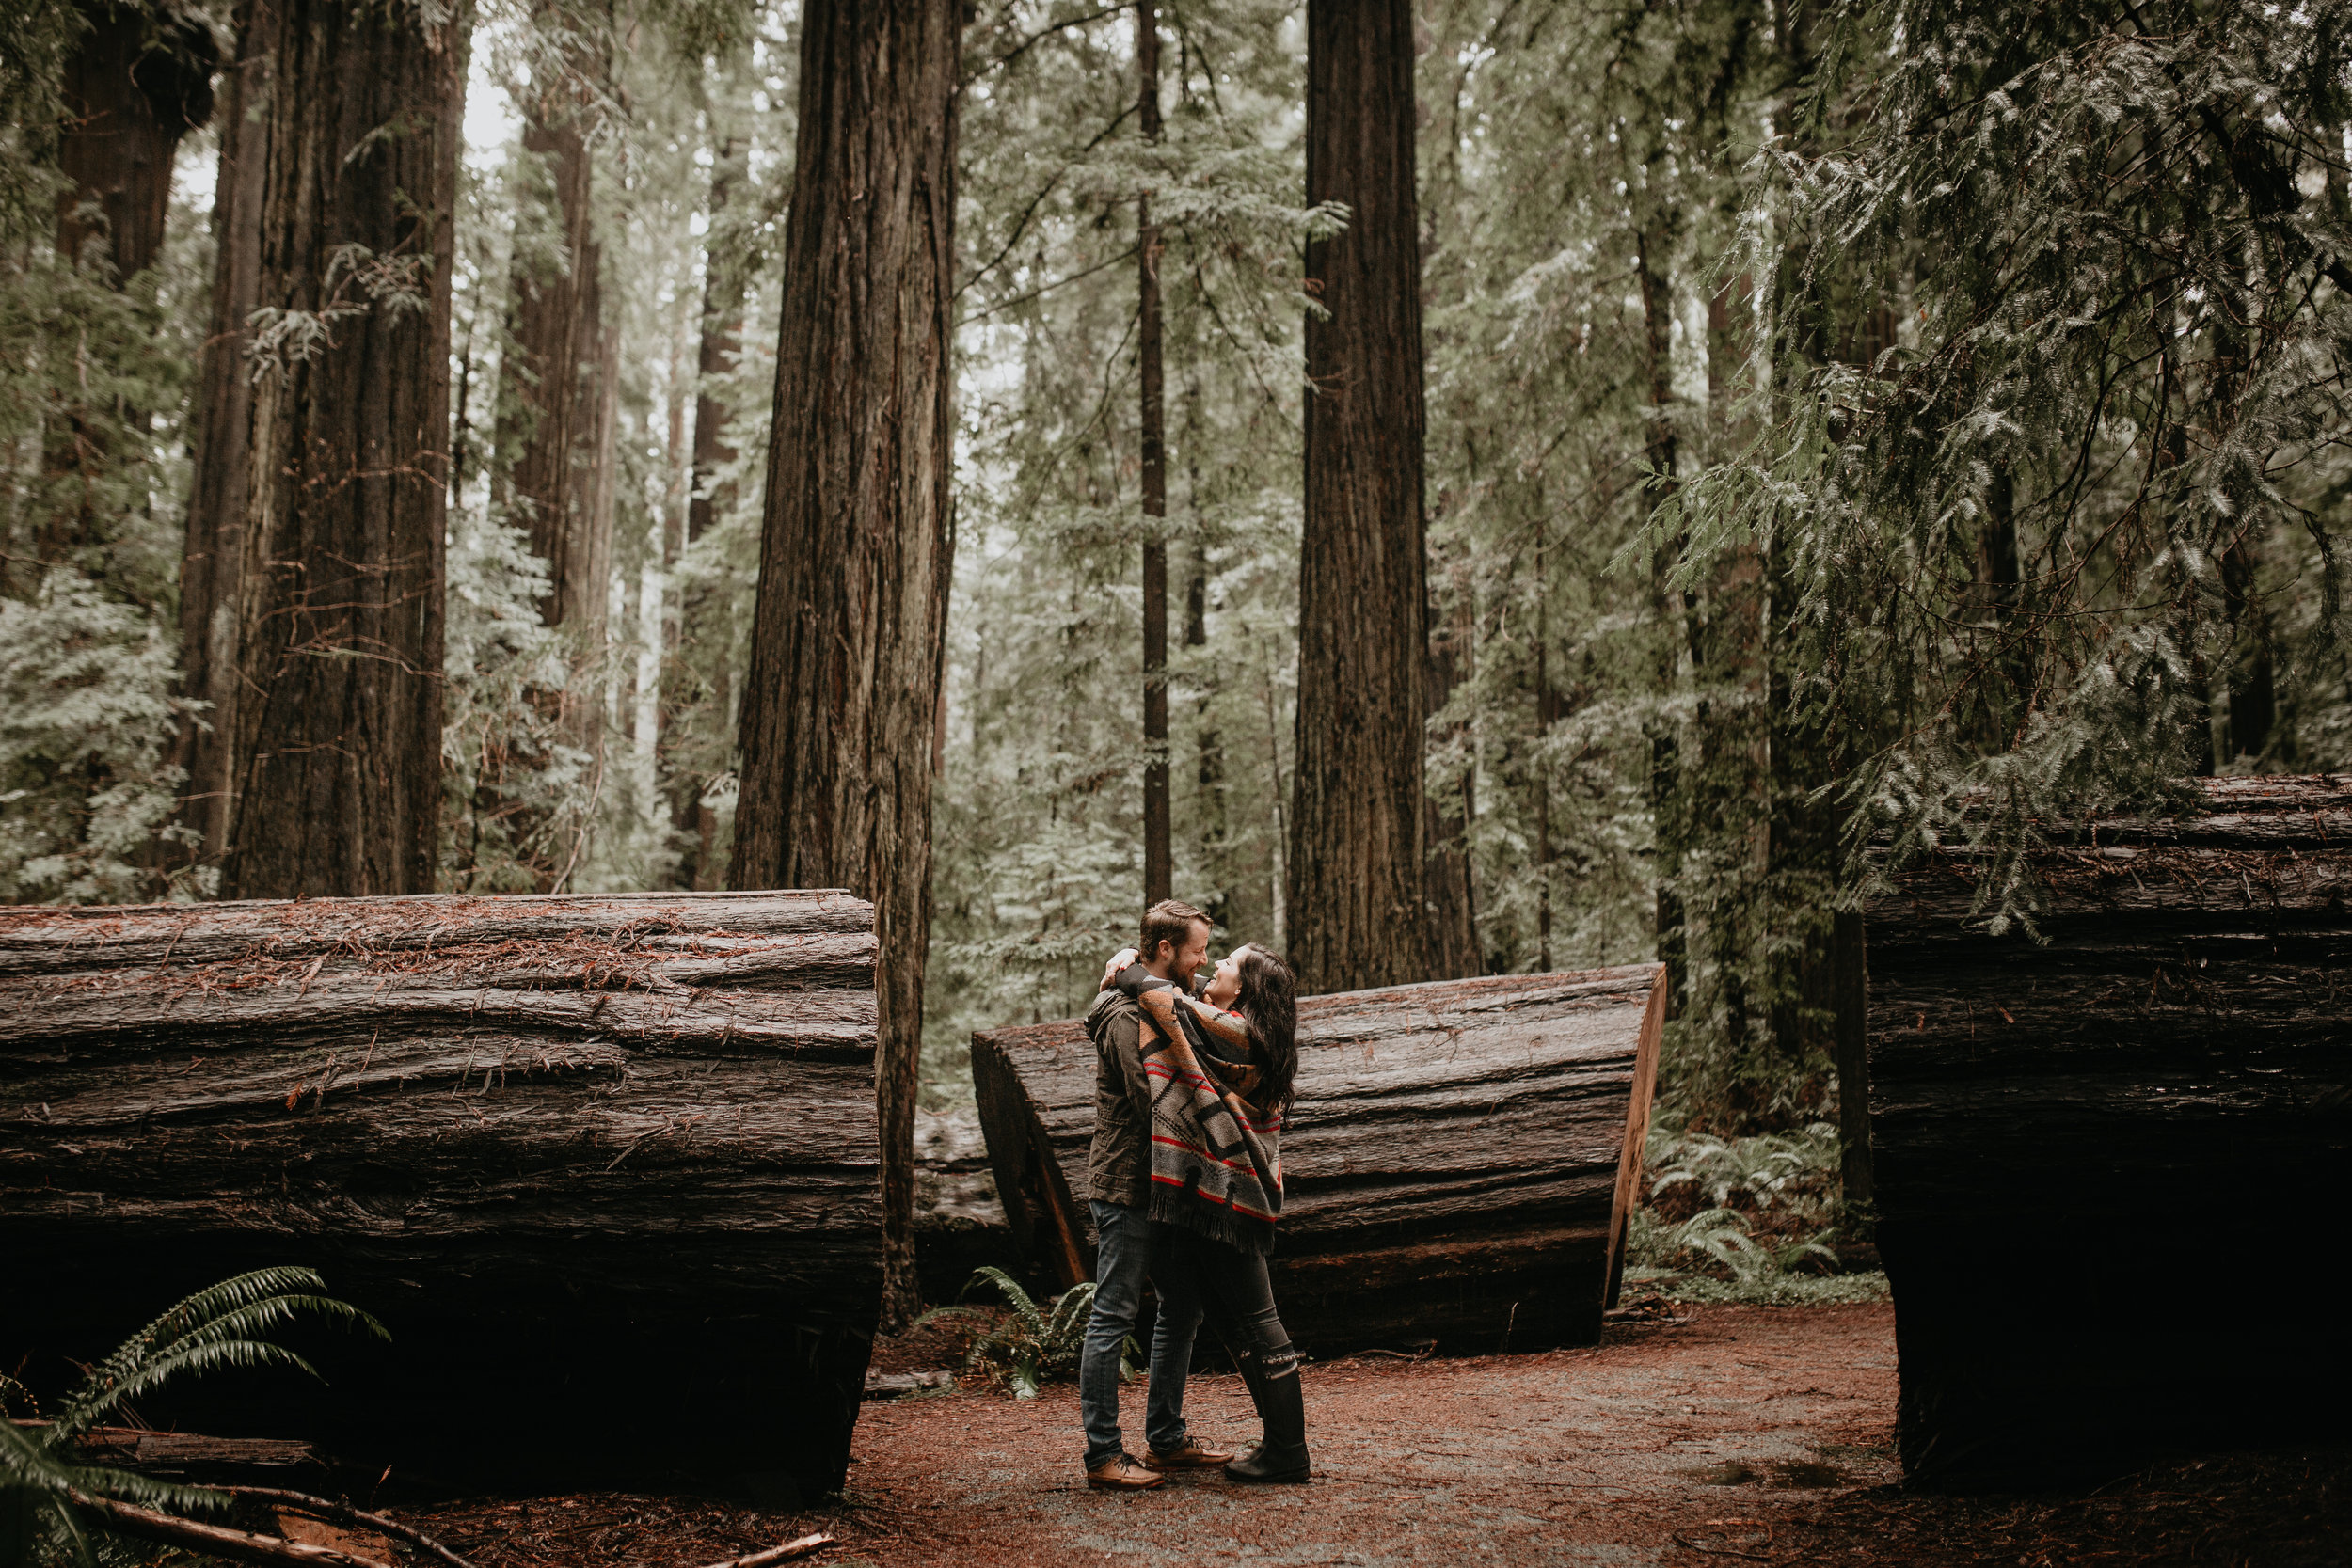 nicole-daacke-photography-redwoods-national-park-forest-rainy-foggy-adventure-engagement-session-humboldt-county-old-growth-redwood-tree-elopement-intimate-wedding-photographer-17.jpg